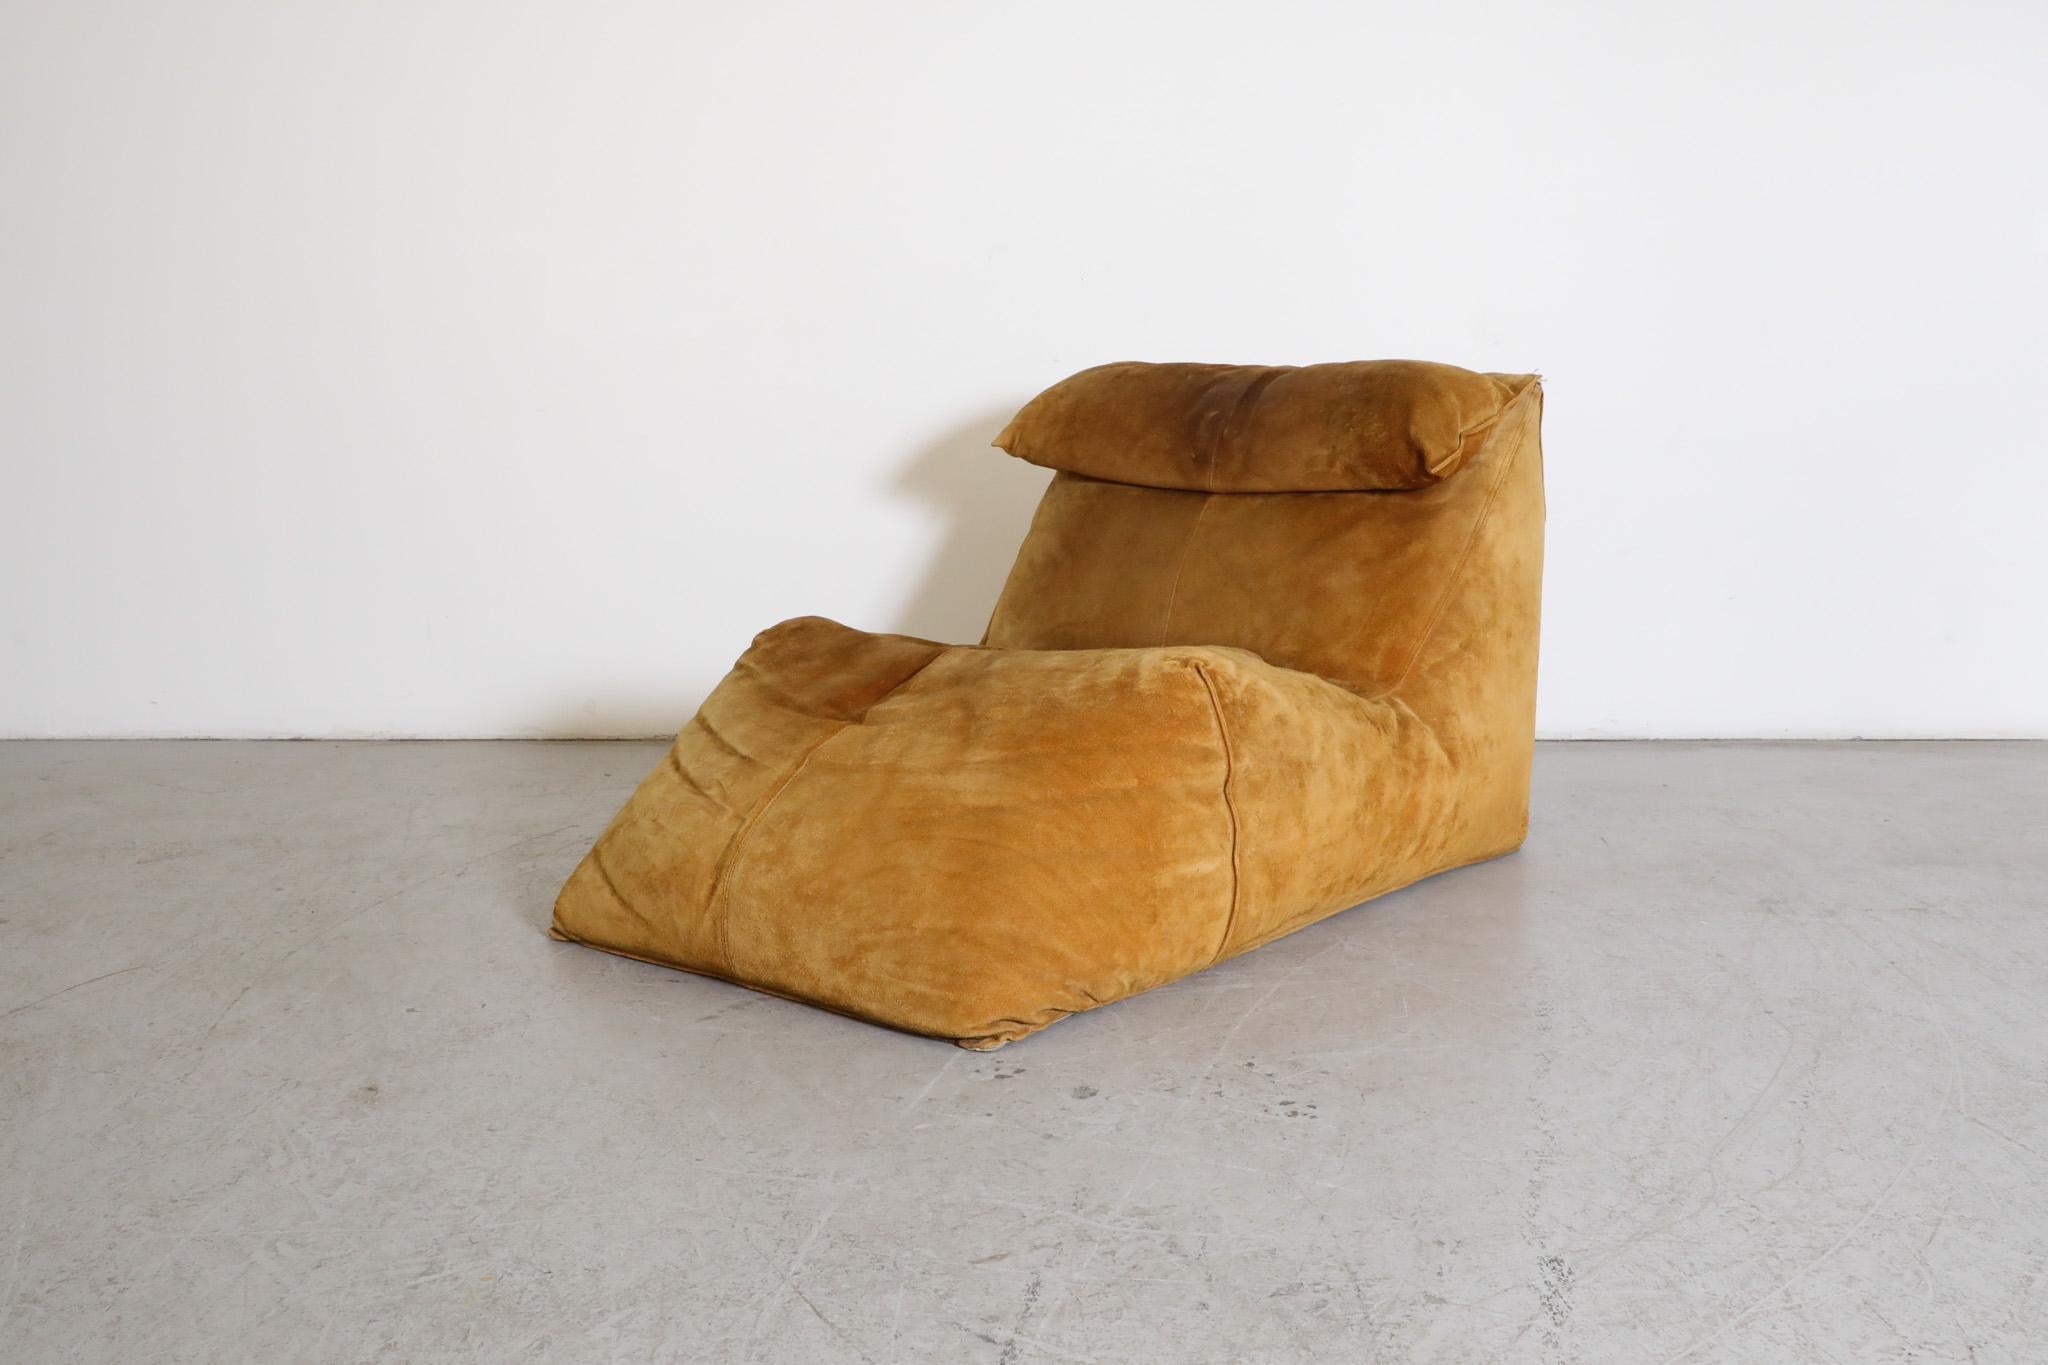 Le Bambole chaise lounge in butterscotch suede by Mario Bellini for C&B Italia, 1972. The Bambole series has become an iconic symbol of Italian design. It was awarded the 'Compasso d'Oro' award in 1979 and is now in MoMA's permanent collection. The